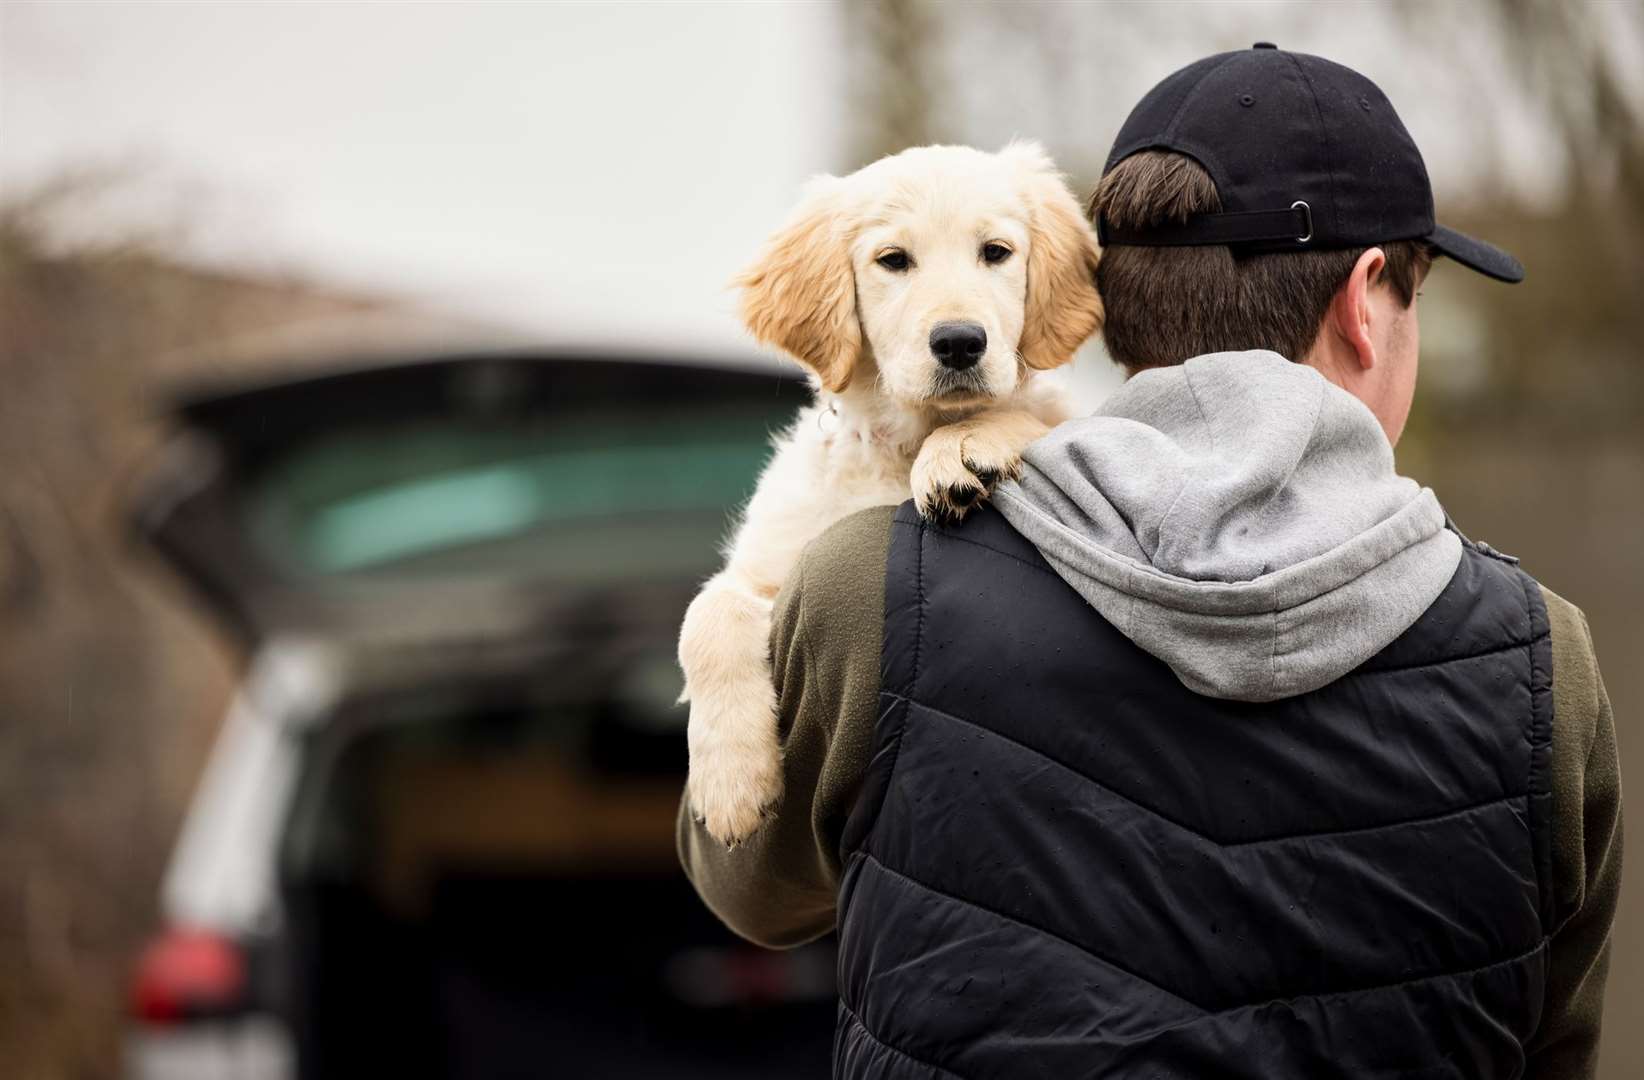 With puppy sales booming in lockdown, dognapping has become a huge issue.